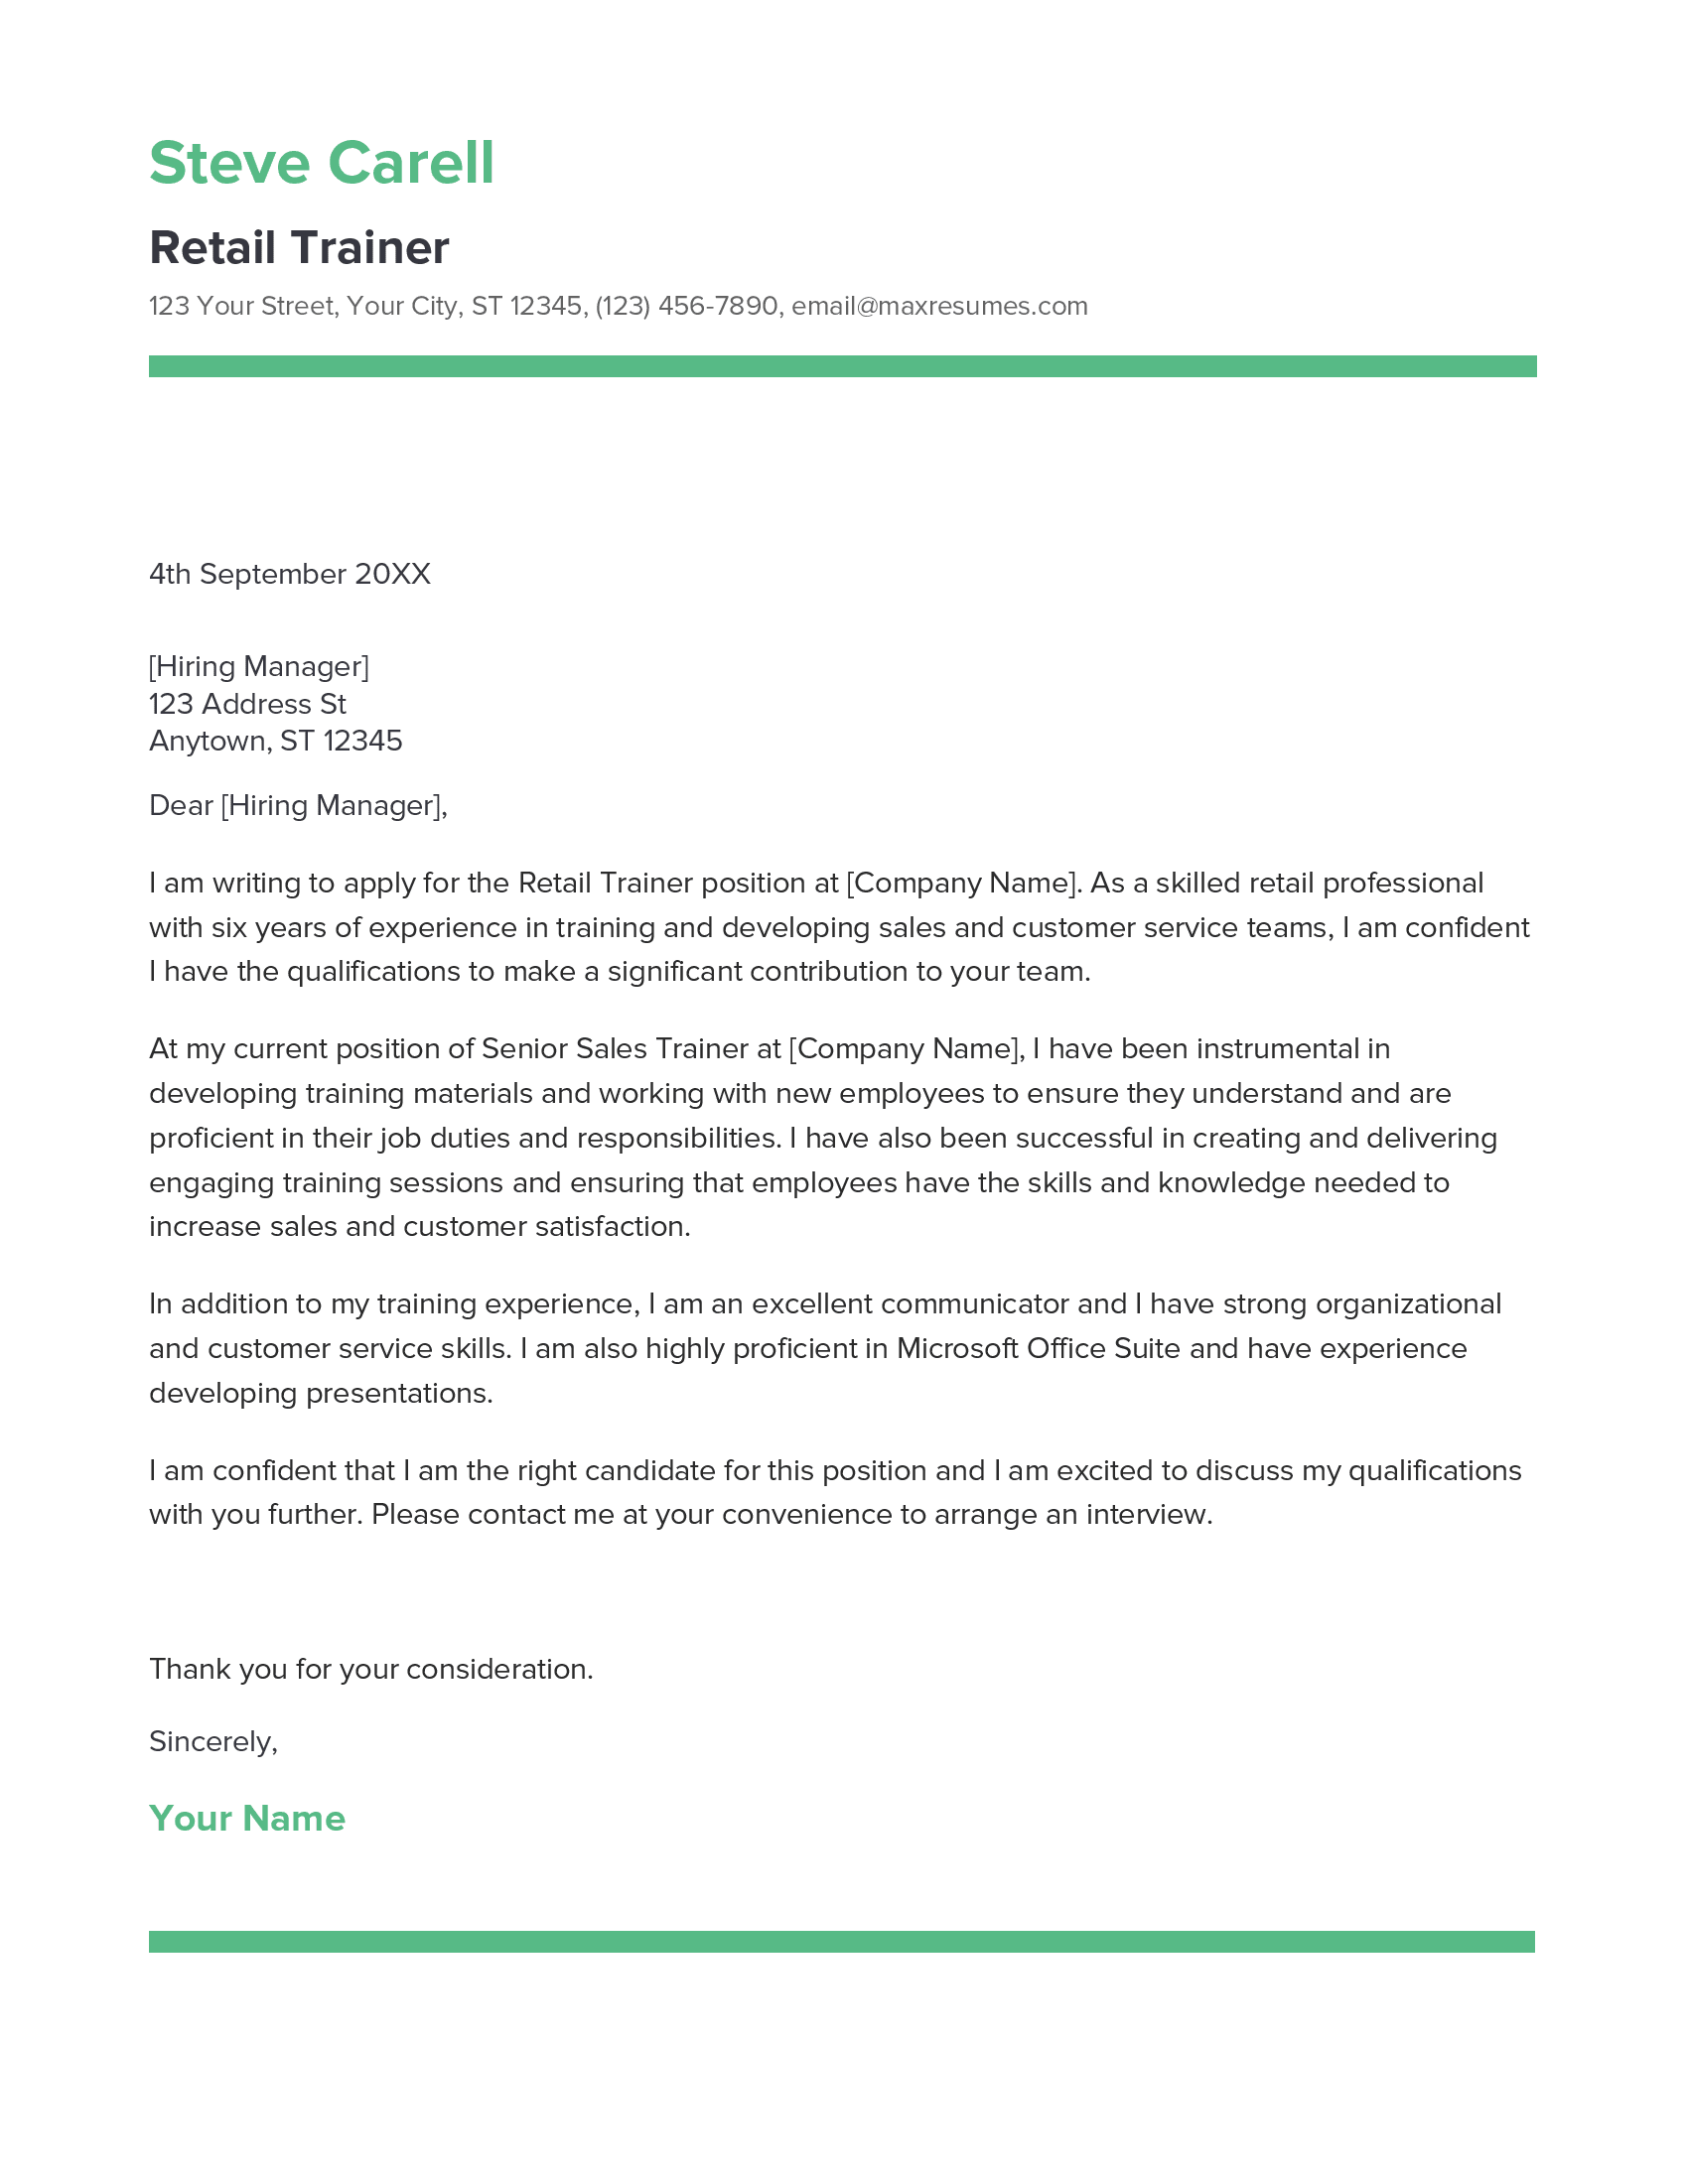 Retail Trainer Cover Letter Example